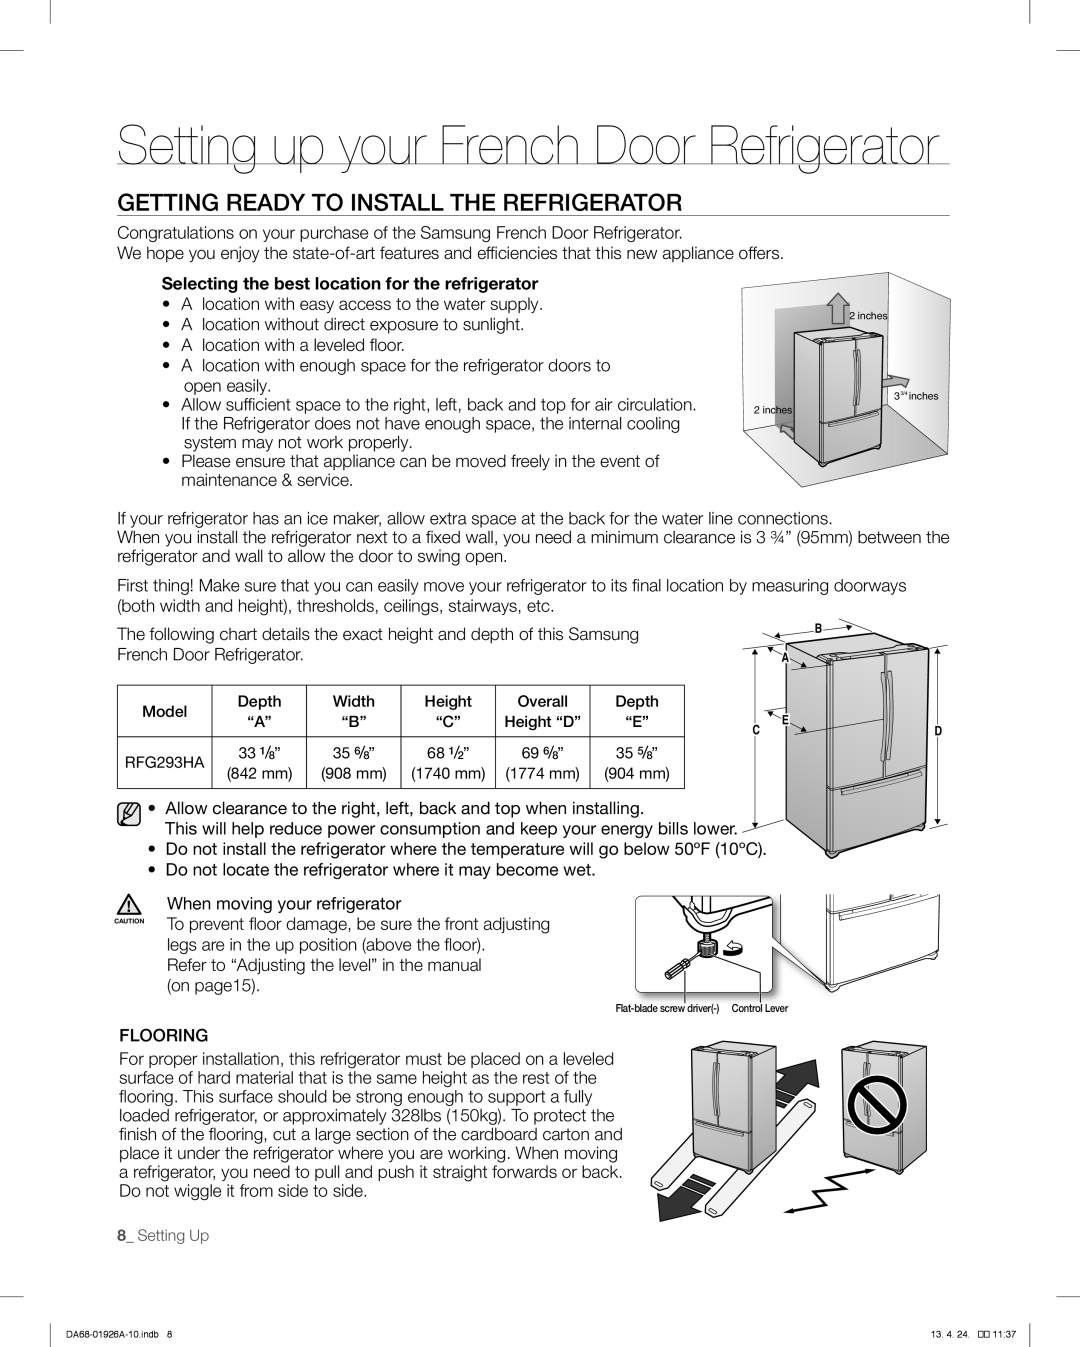 Samsung RFG293HARS, RFG293HAWP Setting up your French Door Refrigerator, Getting Ready To Install The Refrigerator 